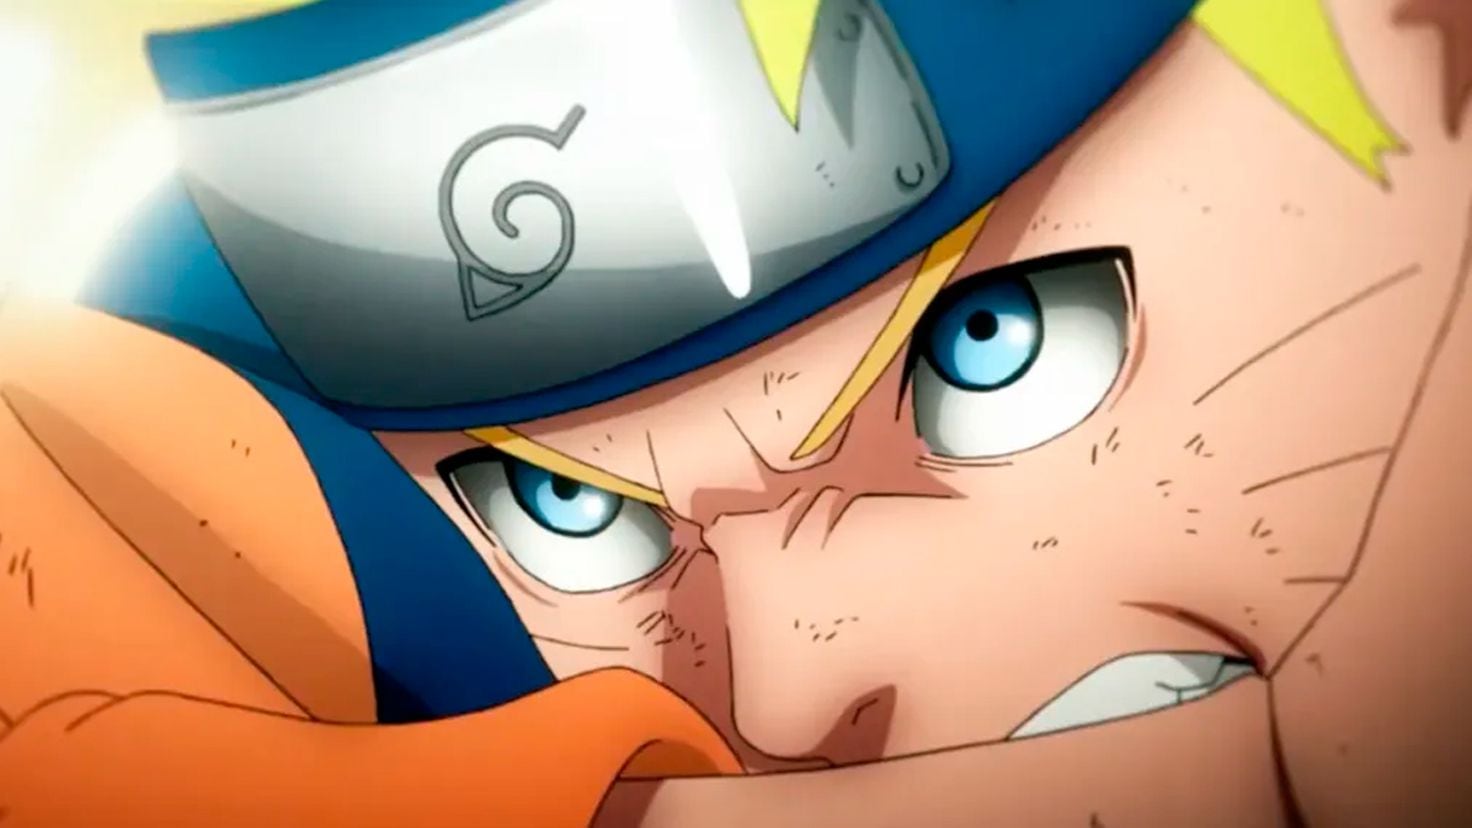 Naruto celebrates its 20th anniversary with a trailer for its new episodes:  the Konoha ninjas return - Meristation